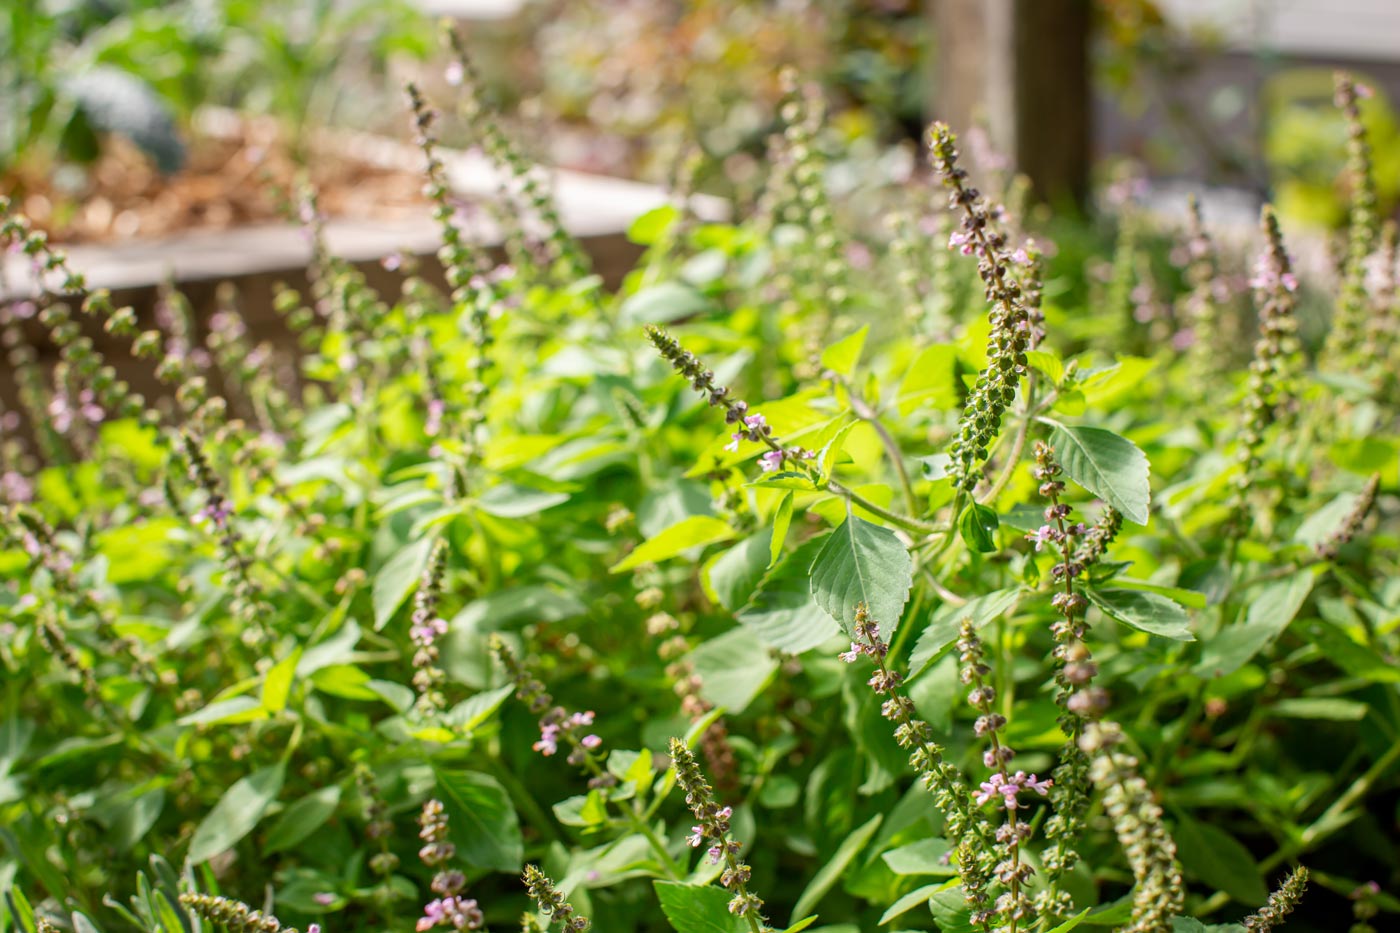 A Holy basil plant in flower and thriving in a garden bed.